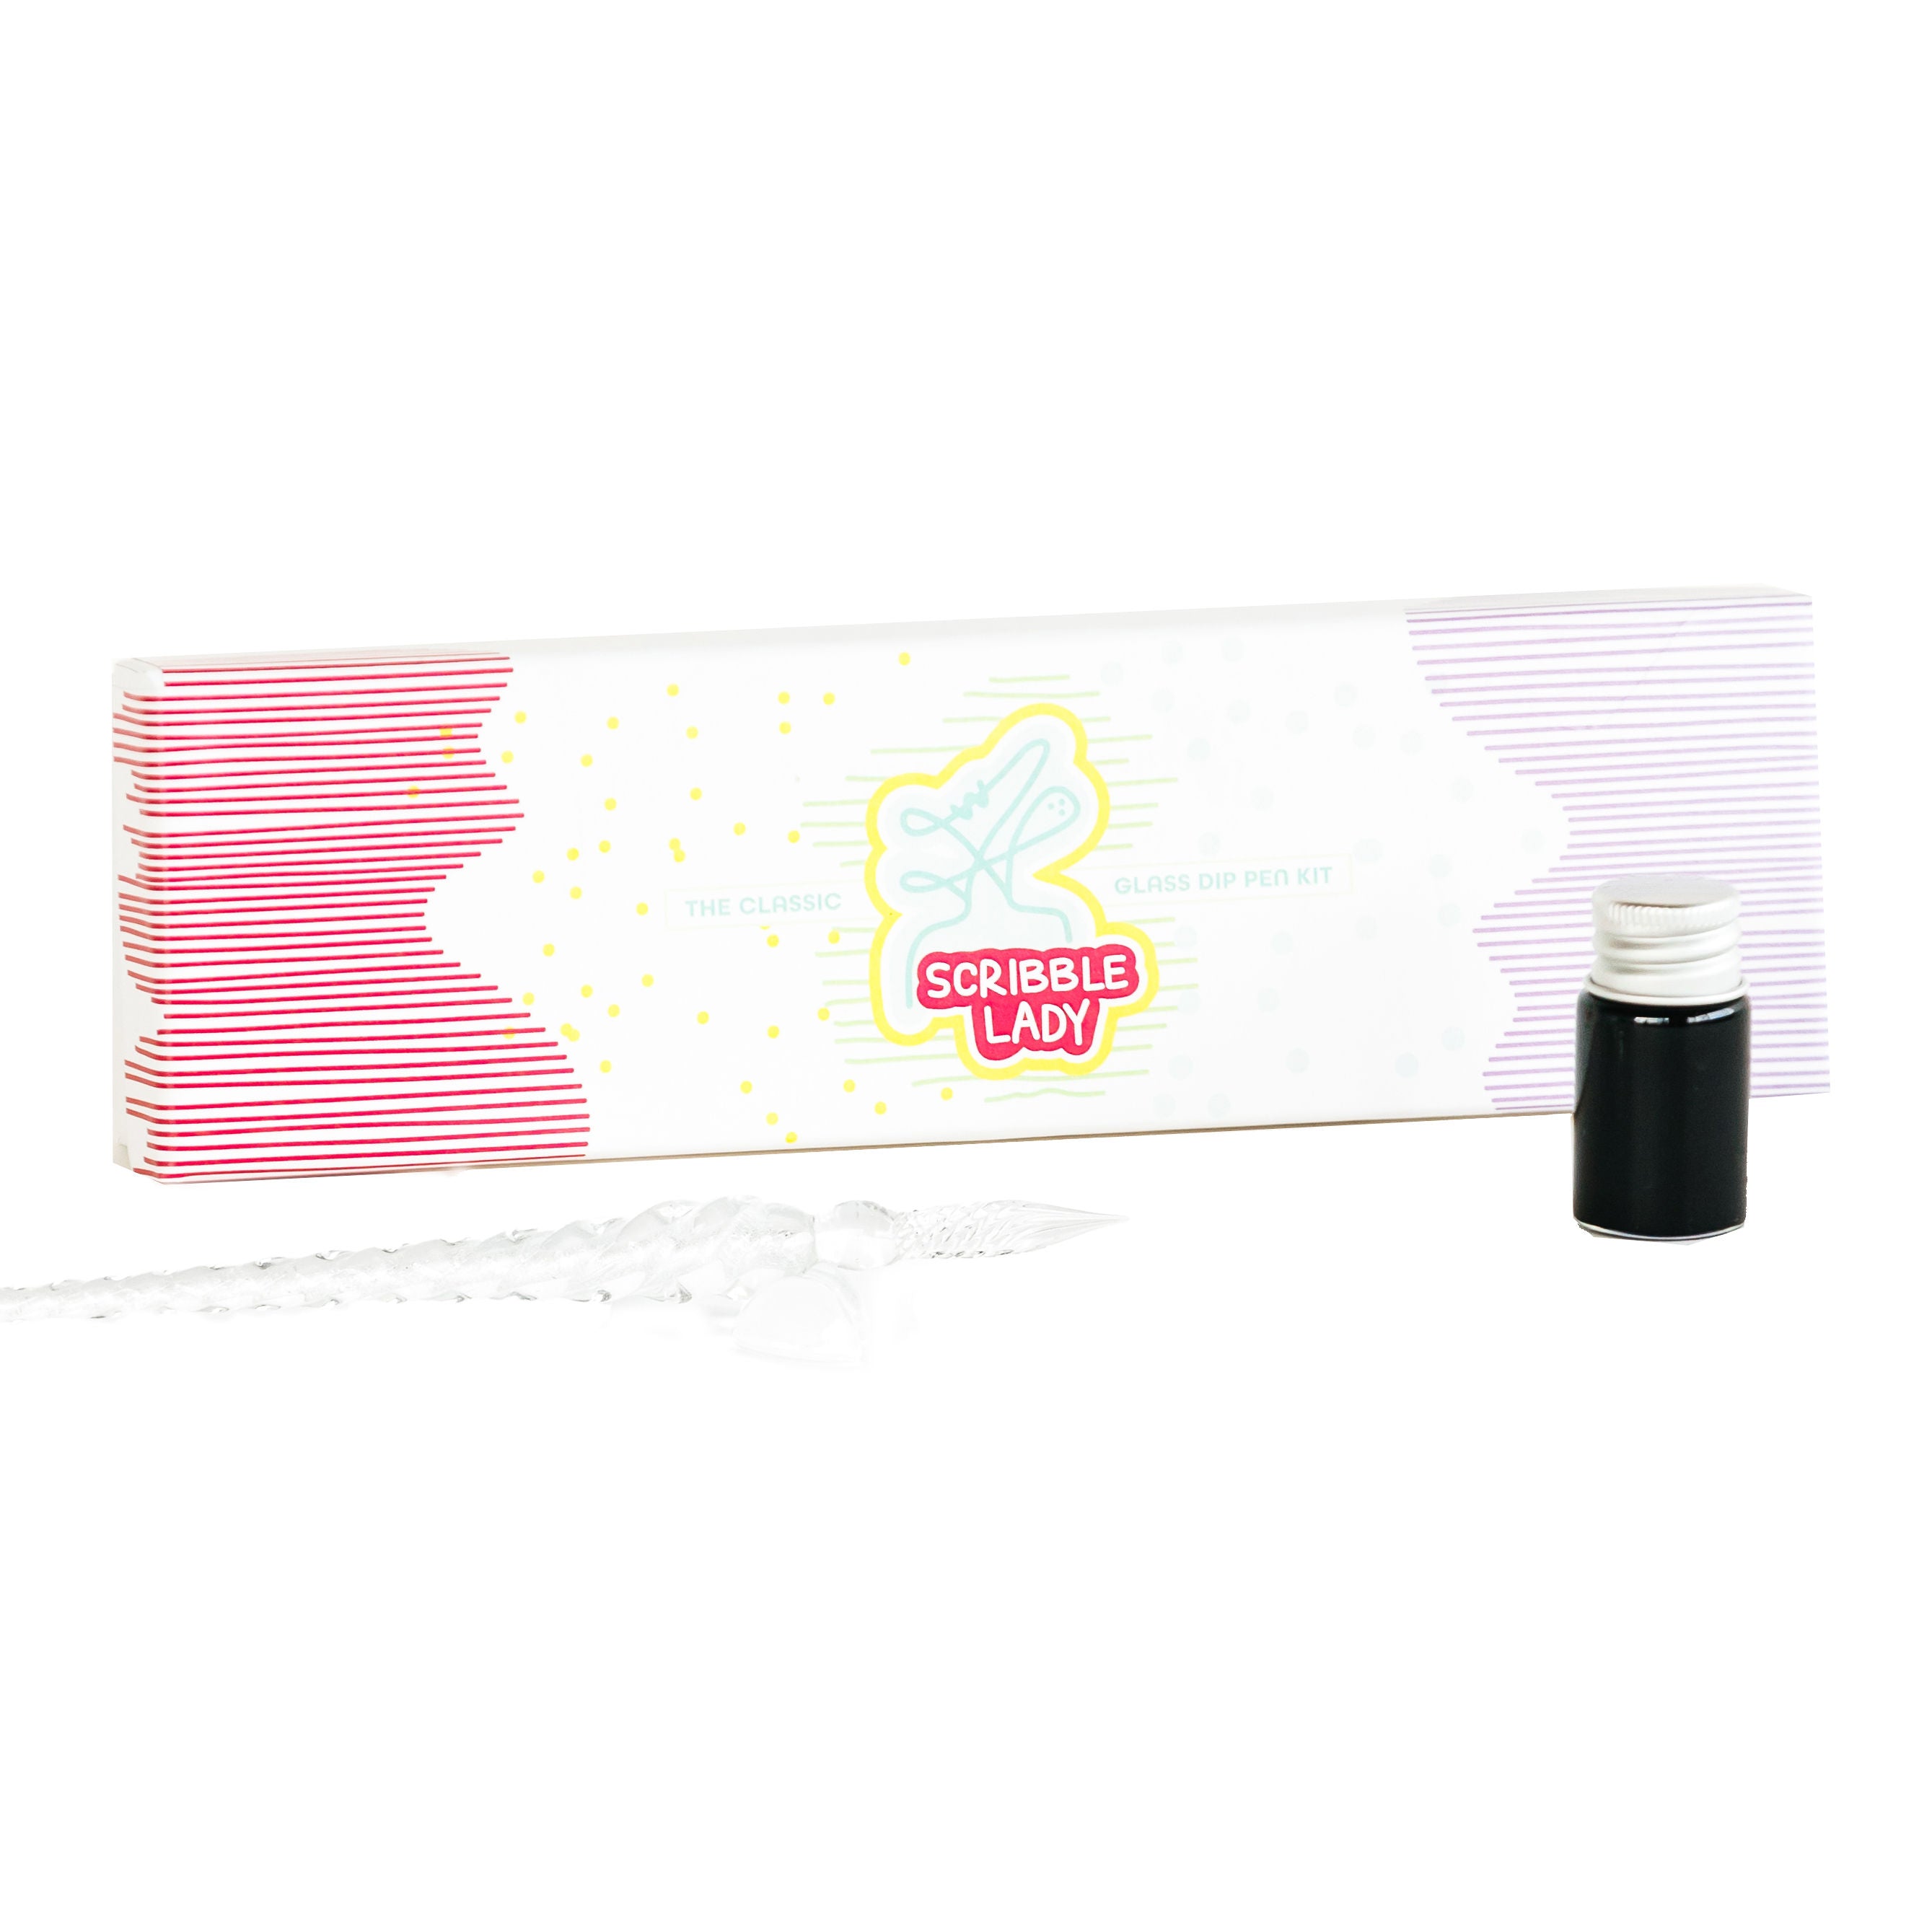 NEW Glow in the Dark Glass Dip Pen Kit with Invisible Ink – Scribble Lady